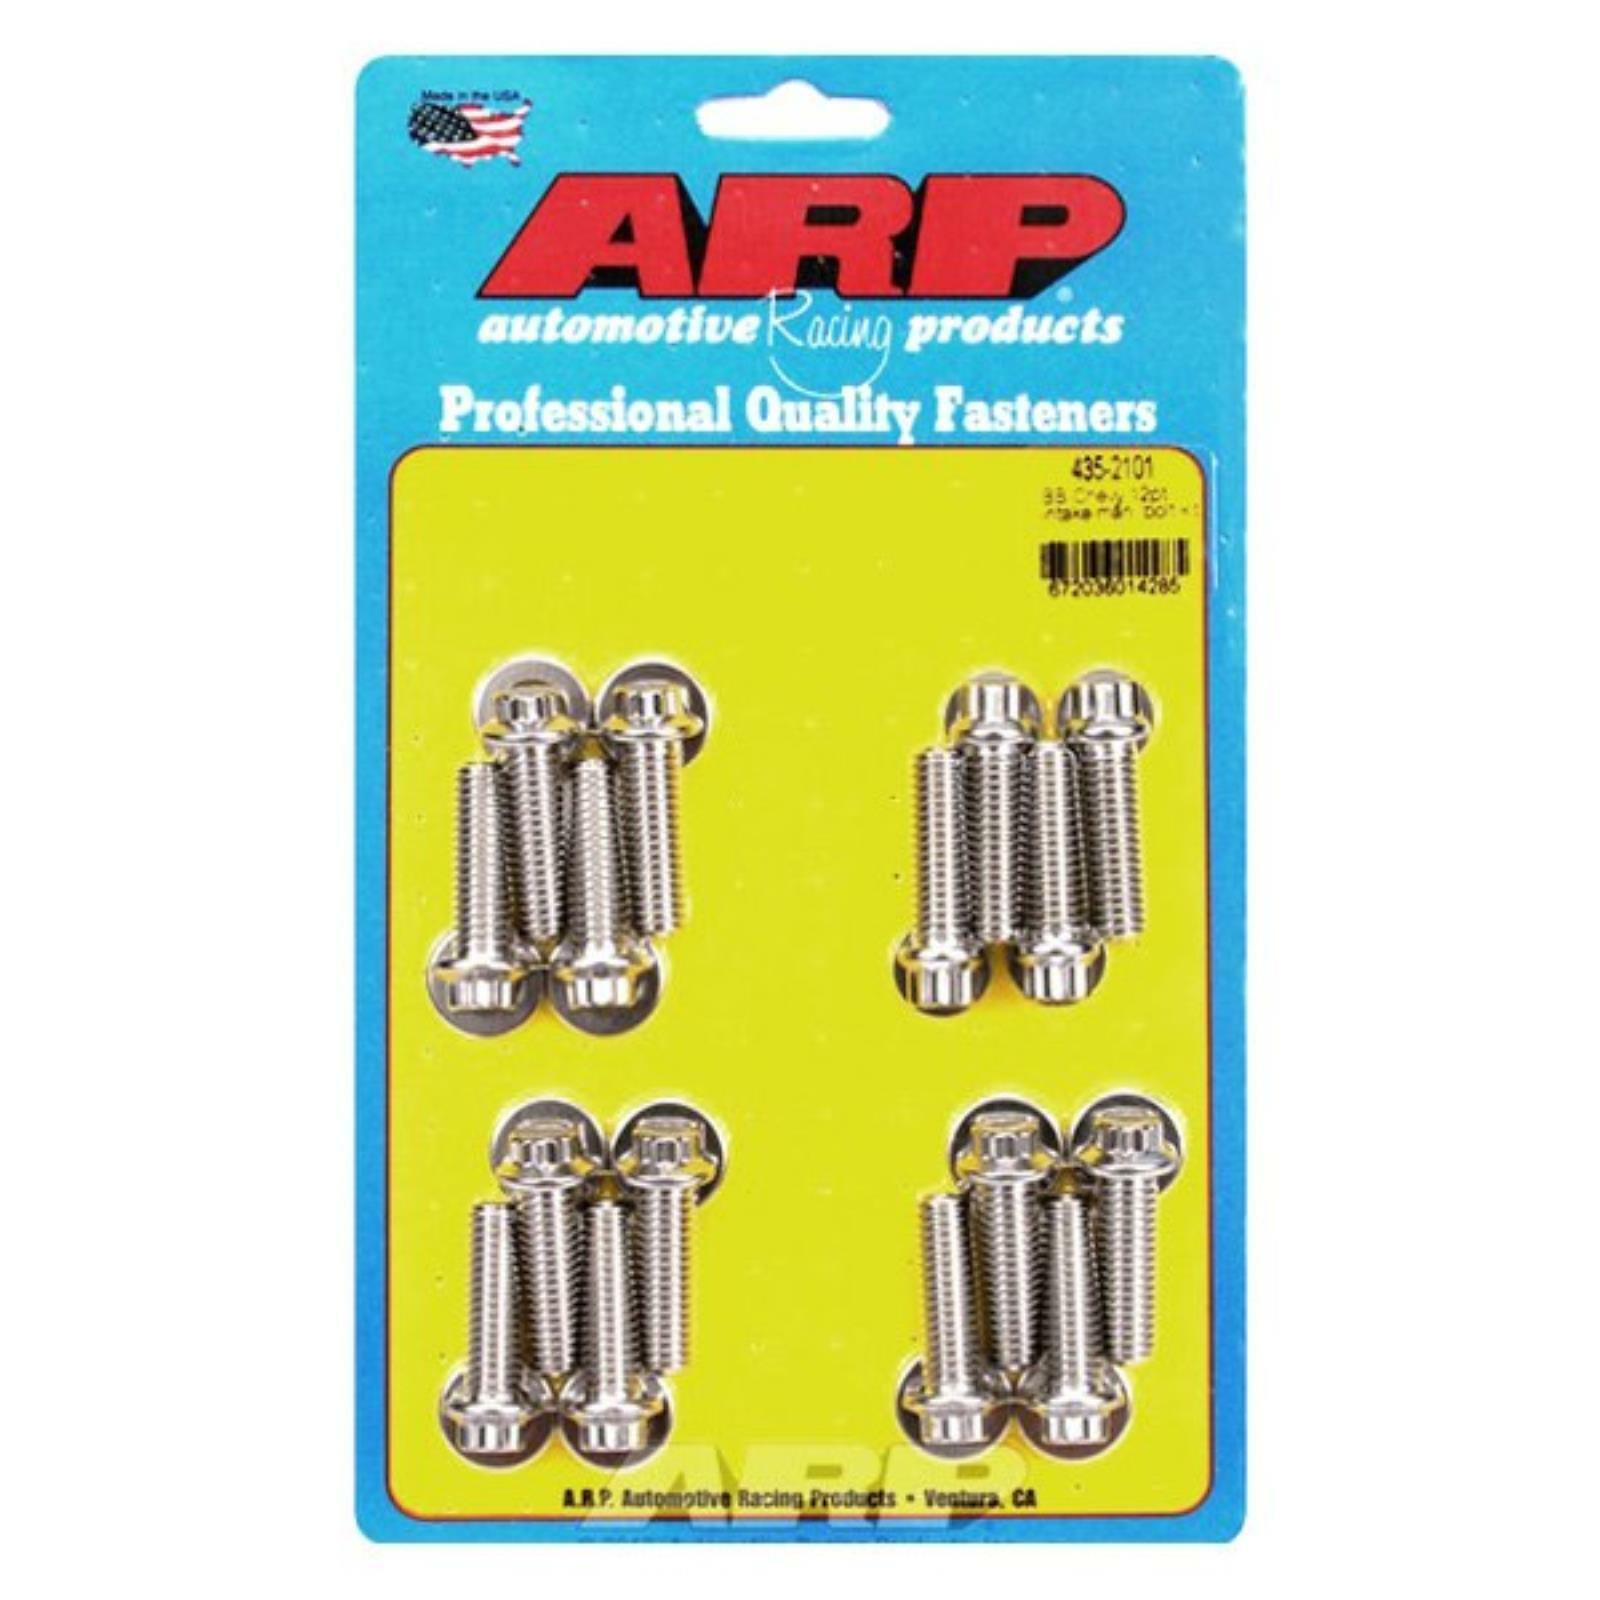 ARP 4D42A9 - Bolt Kit for Intake Manifold Fits 1966-1975 Chevy Bel Air